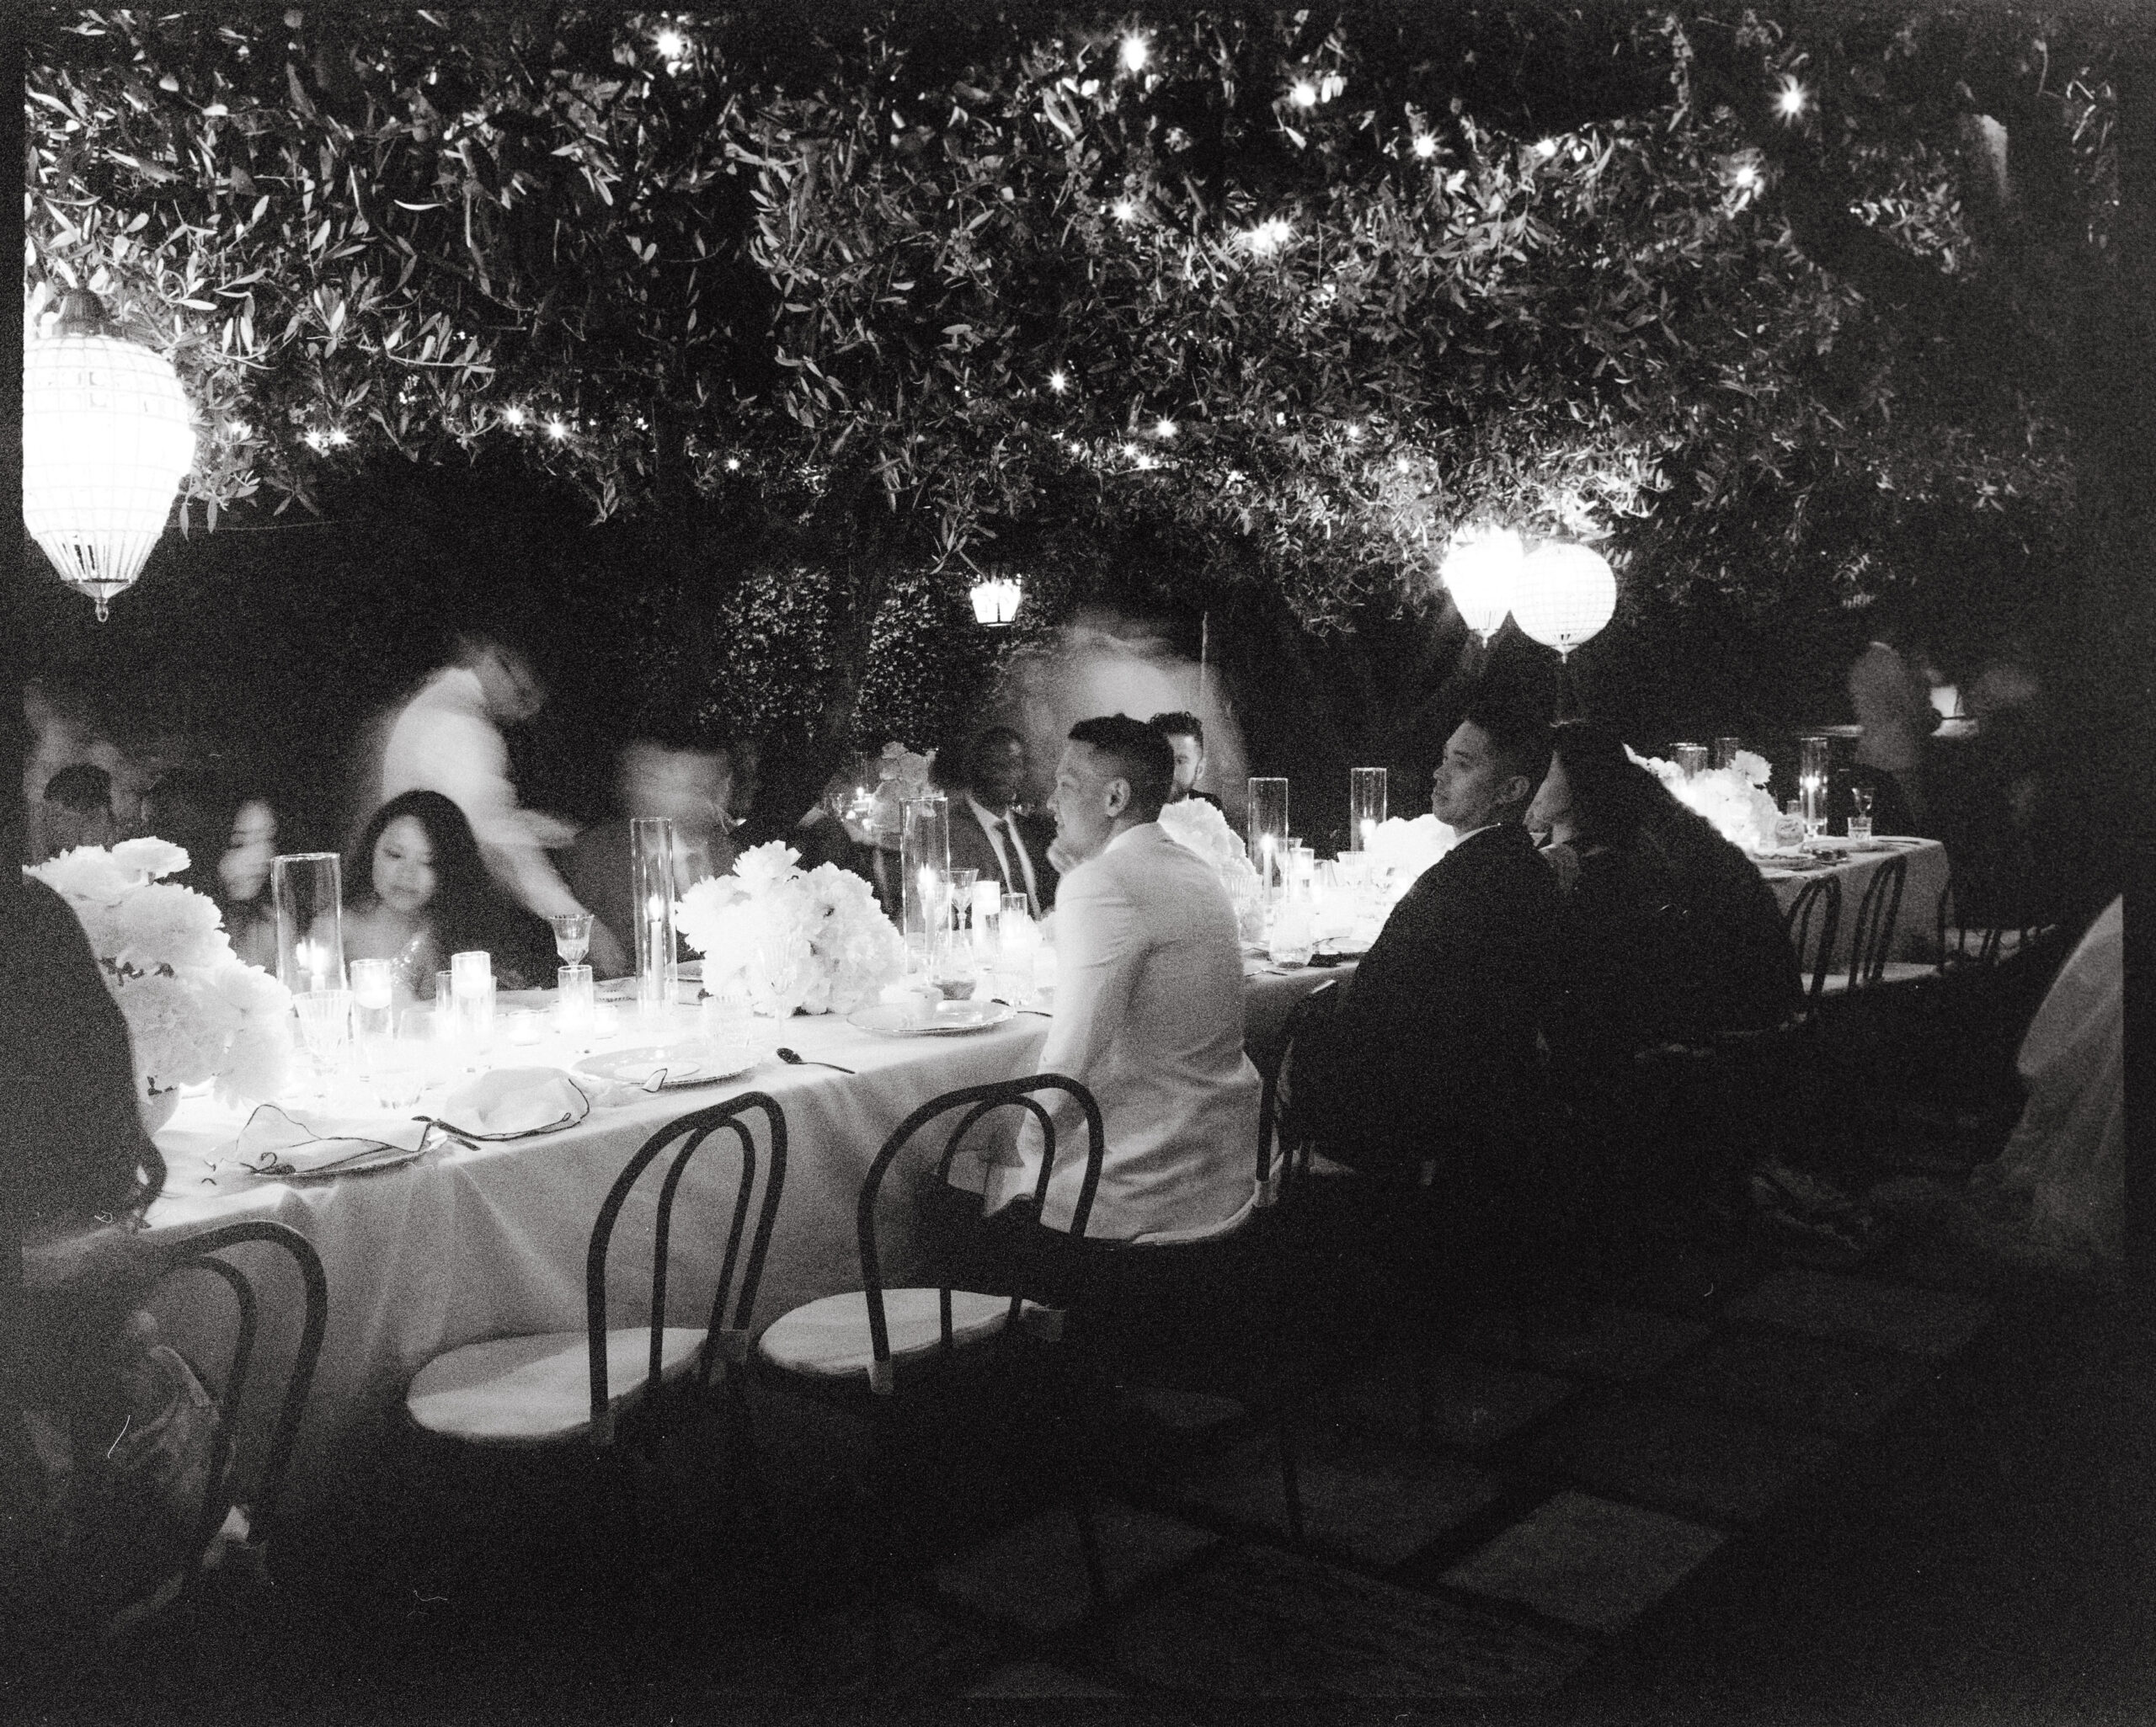 Groom immersed in joy during the summer dinner reception of a destination wedding in Ravello, Italy. Guests mingle in the warm ambiance of the celebration. This timeless moment, captured by Jenny Fu on film with a Mamiya 7 medium format camera, exudes classic elegance in black and white.
